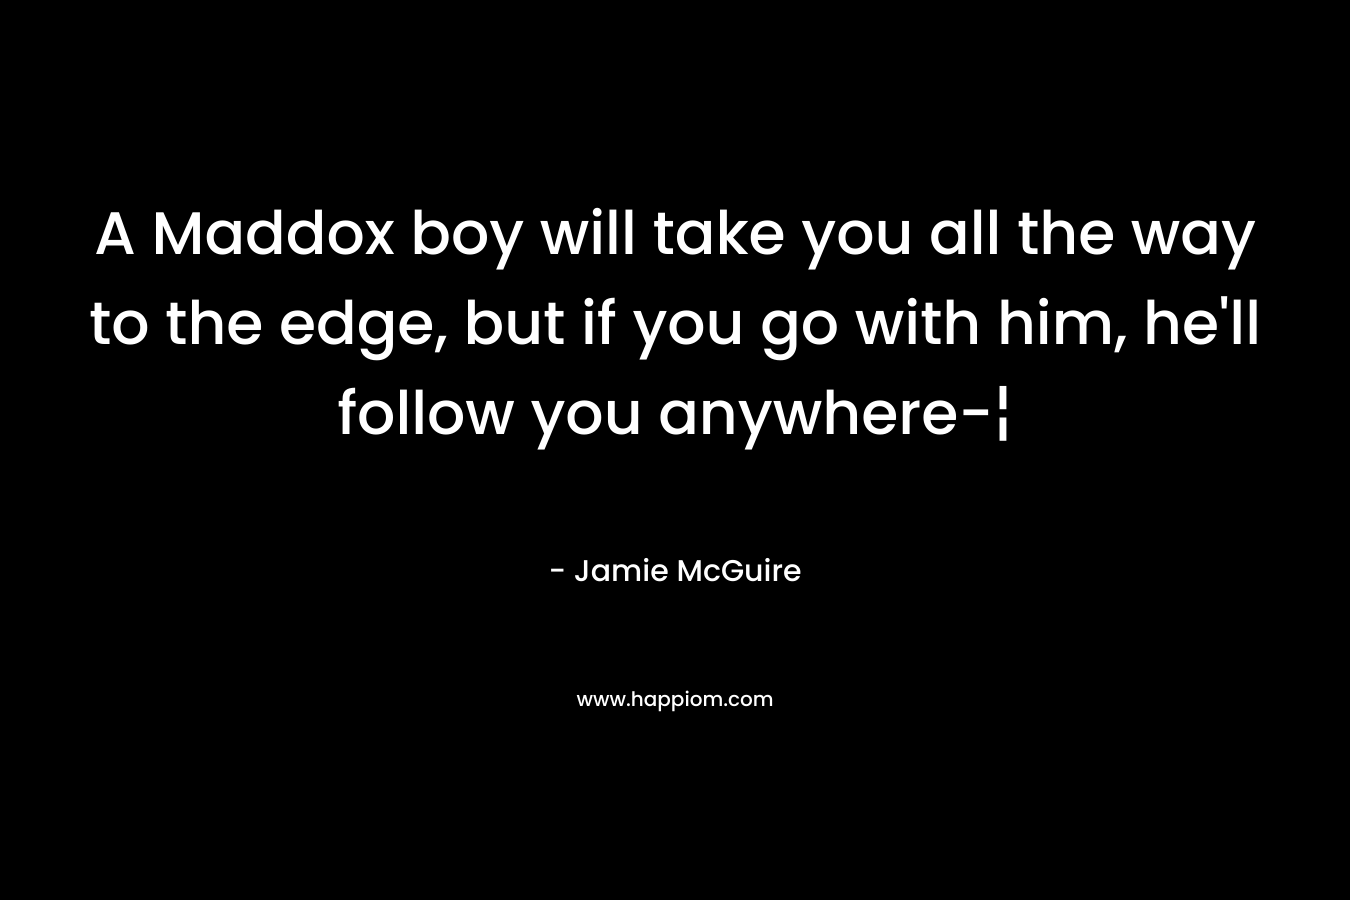 A Maddox boy will take you all the way to the edge, but if you go with him, he’ll follow you anywhere-¦ – Jamie McGuire